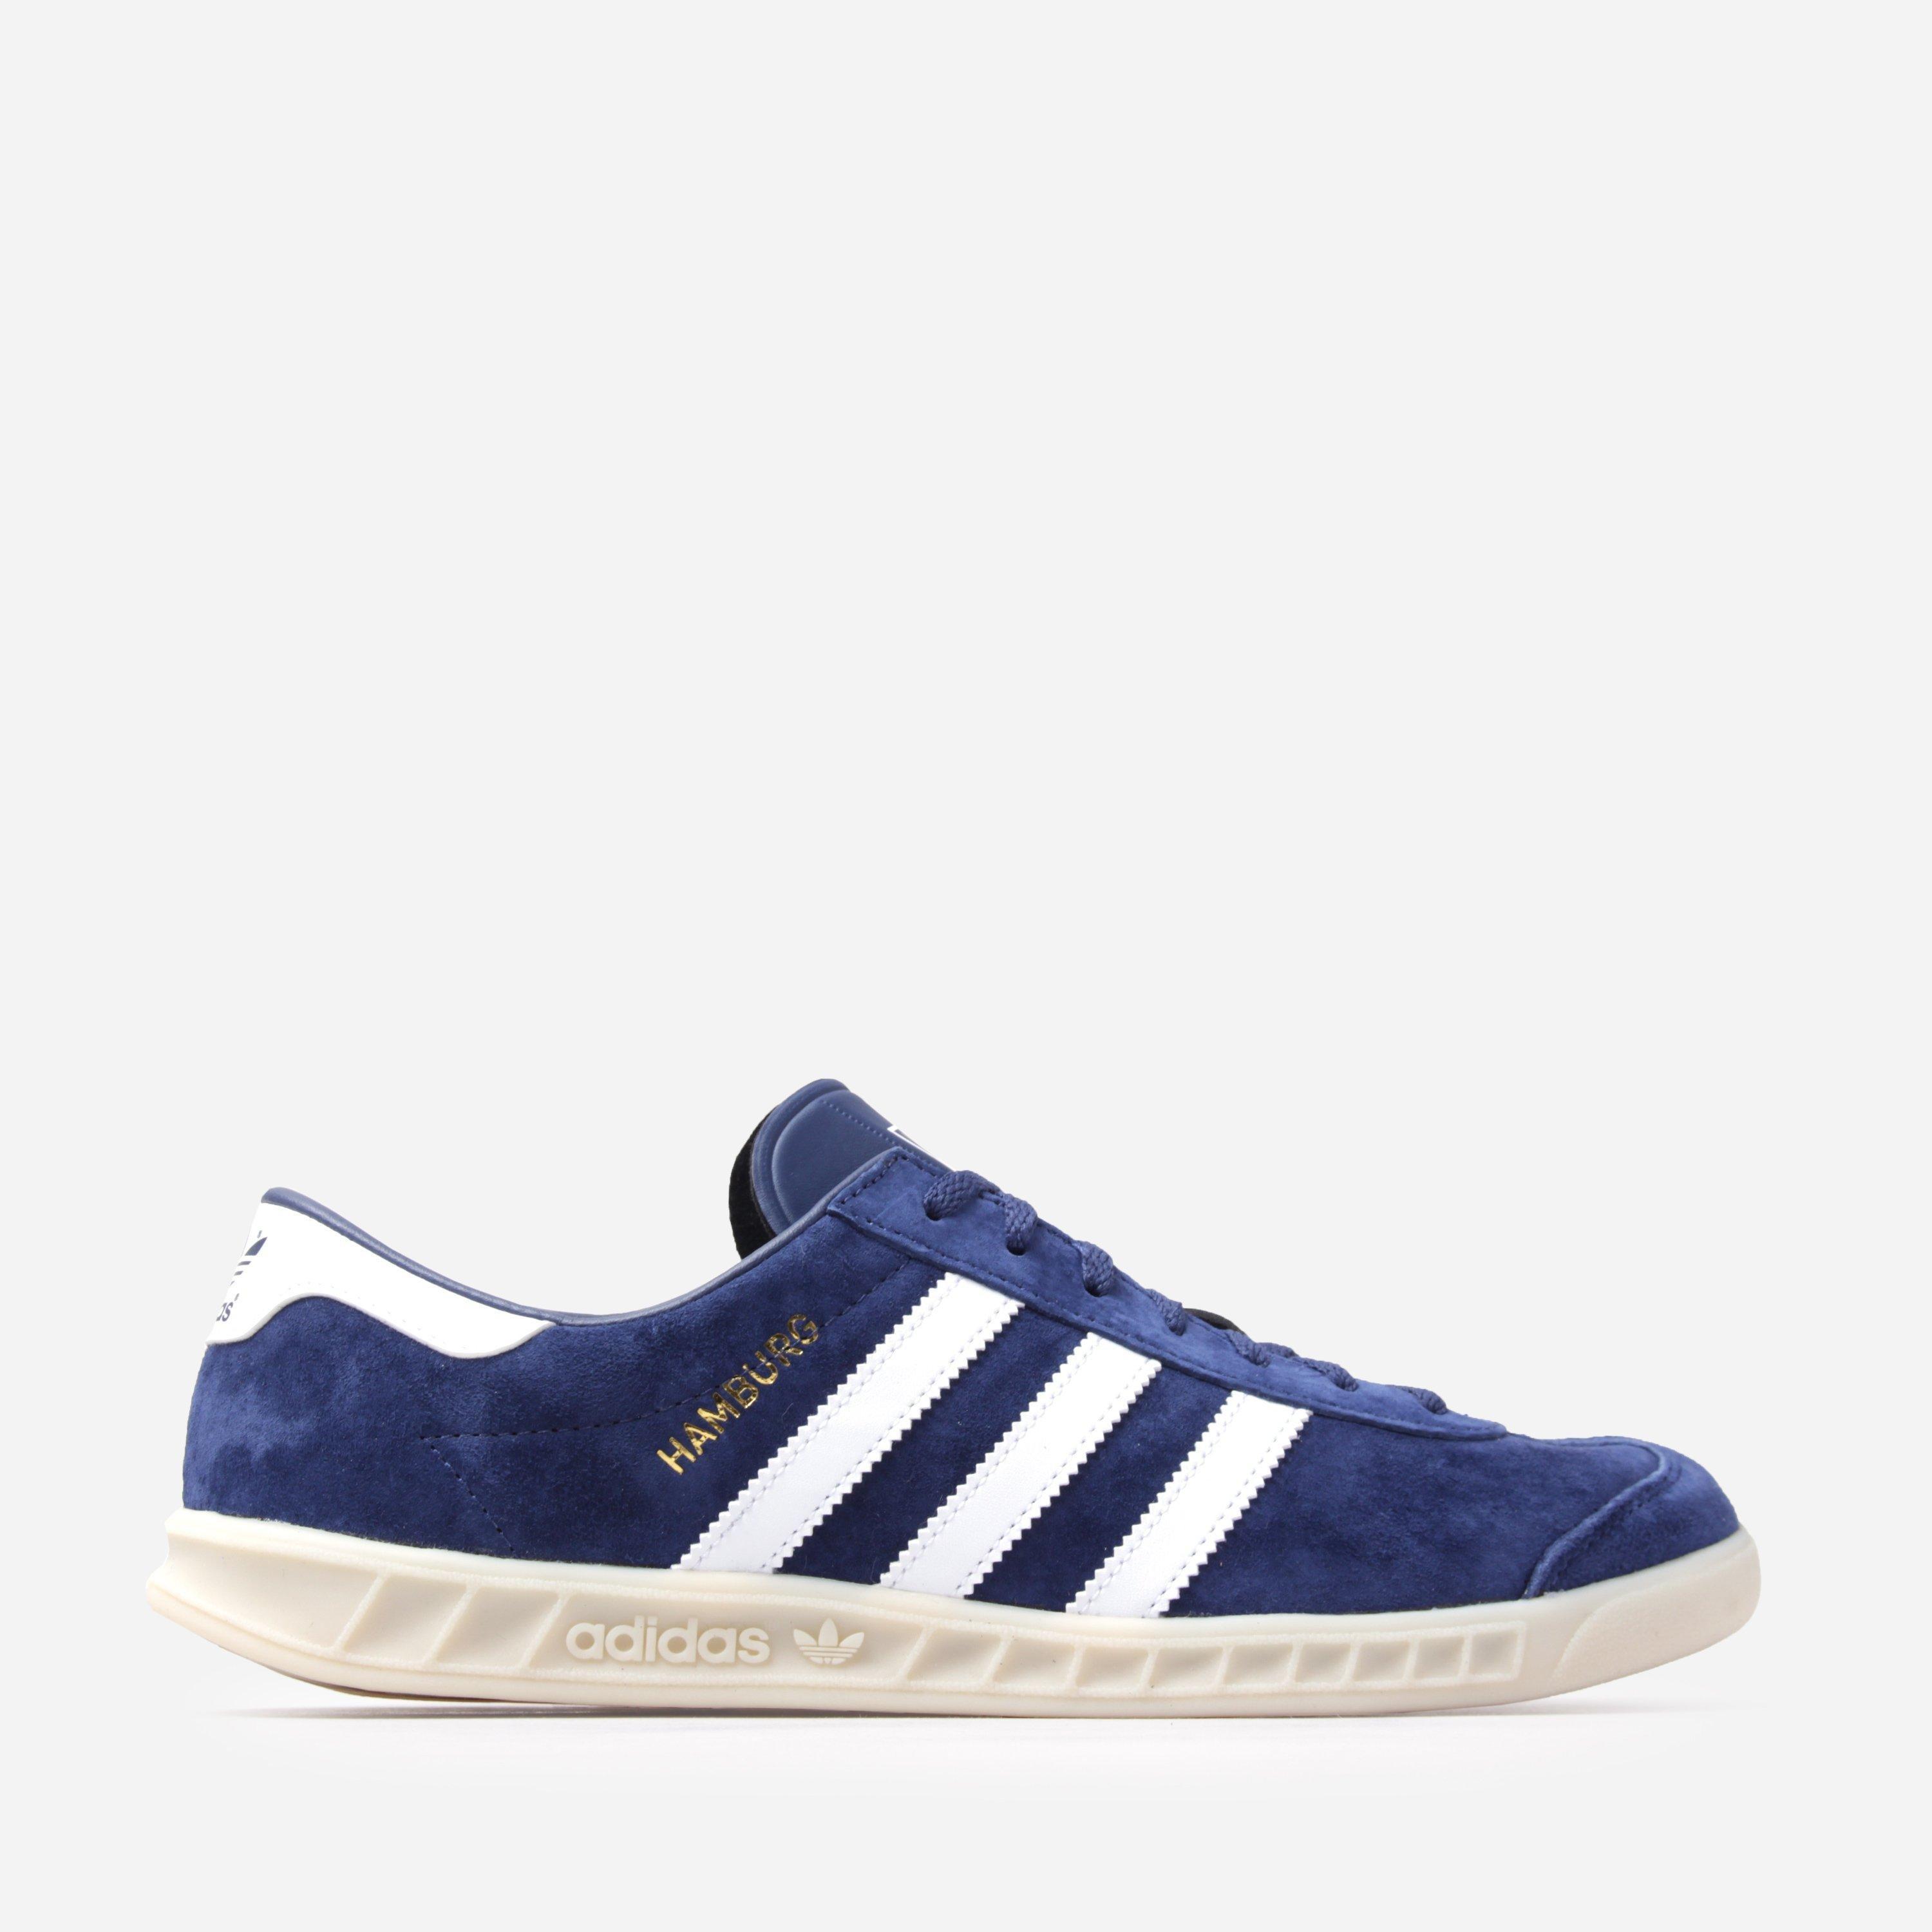 adidas Originals Leather Hamburg City Series in Blue/White (Blue) for ...